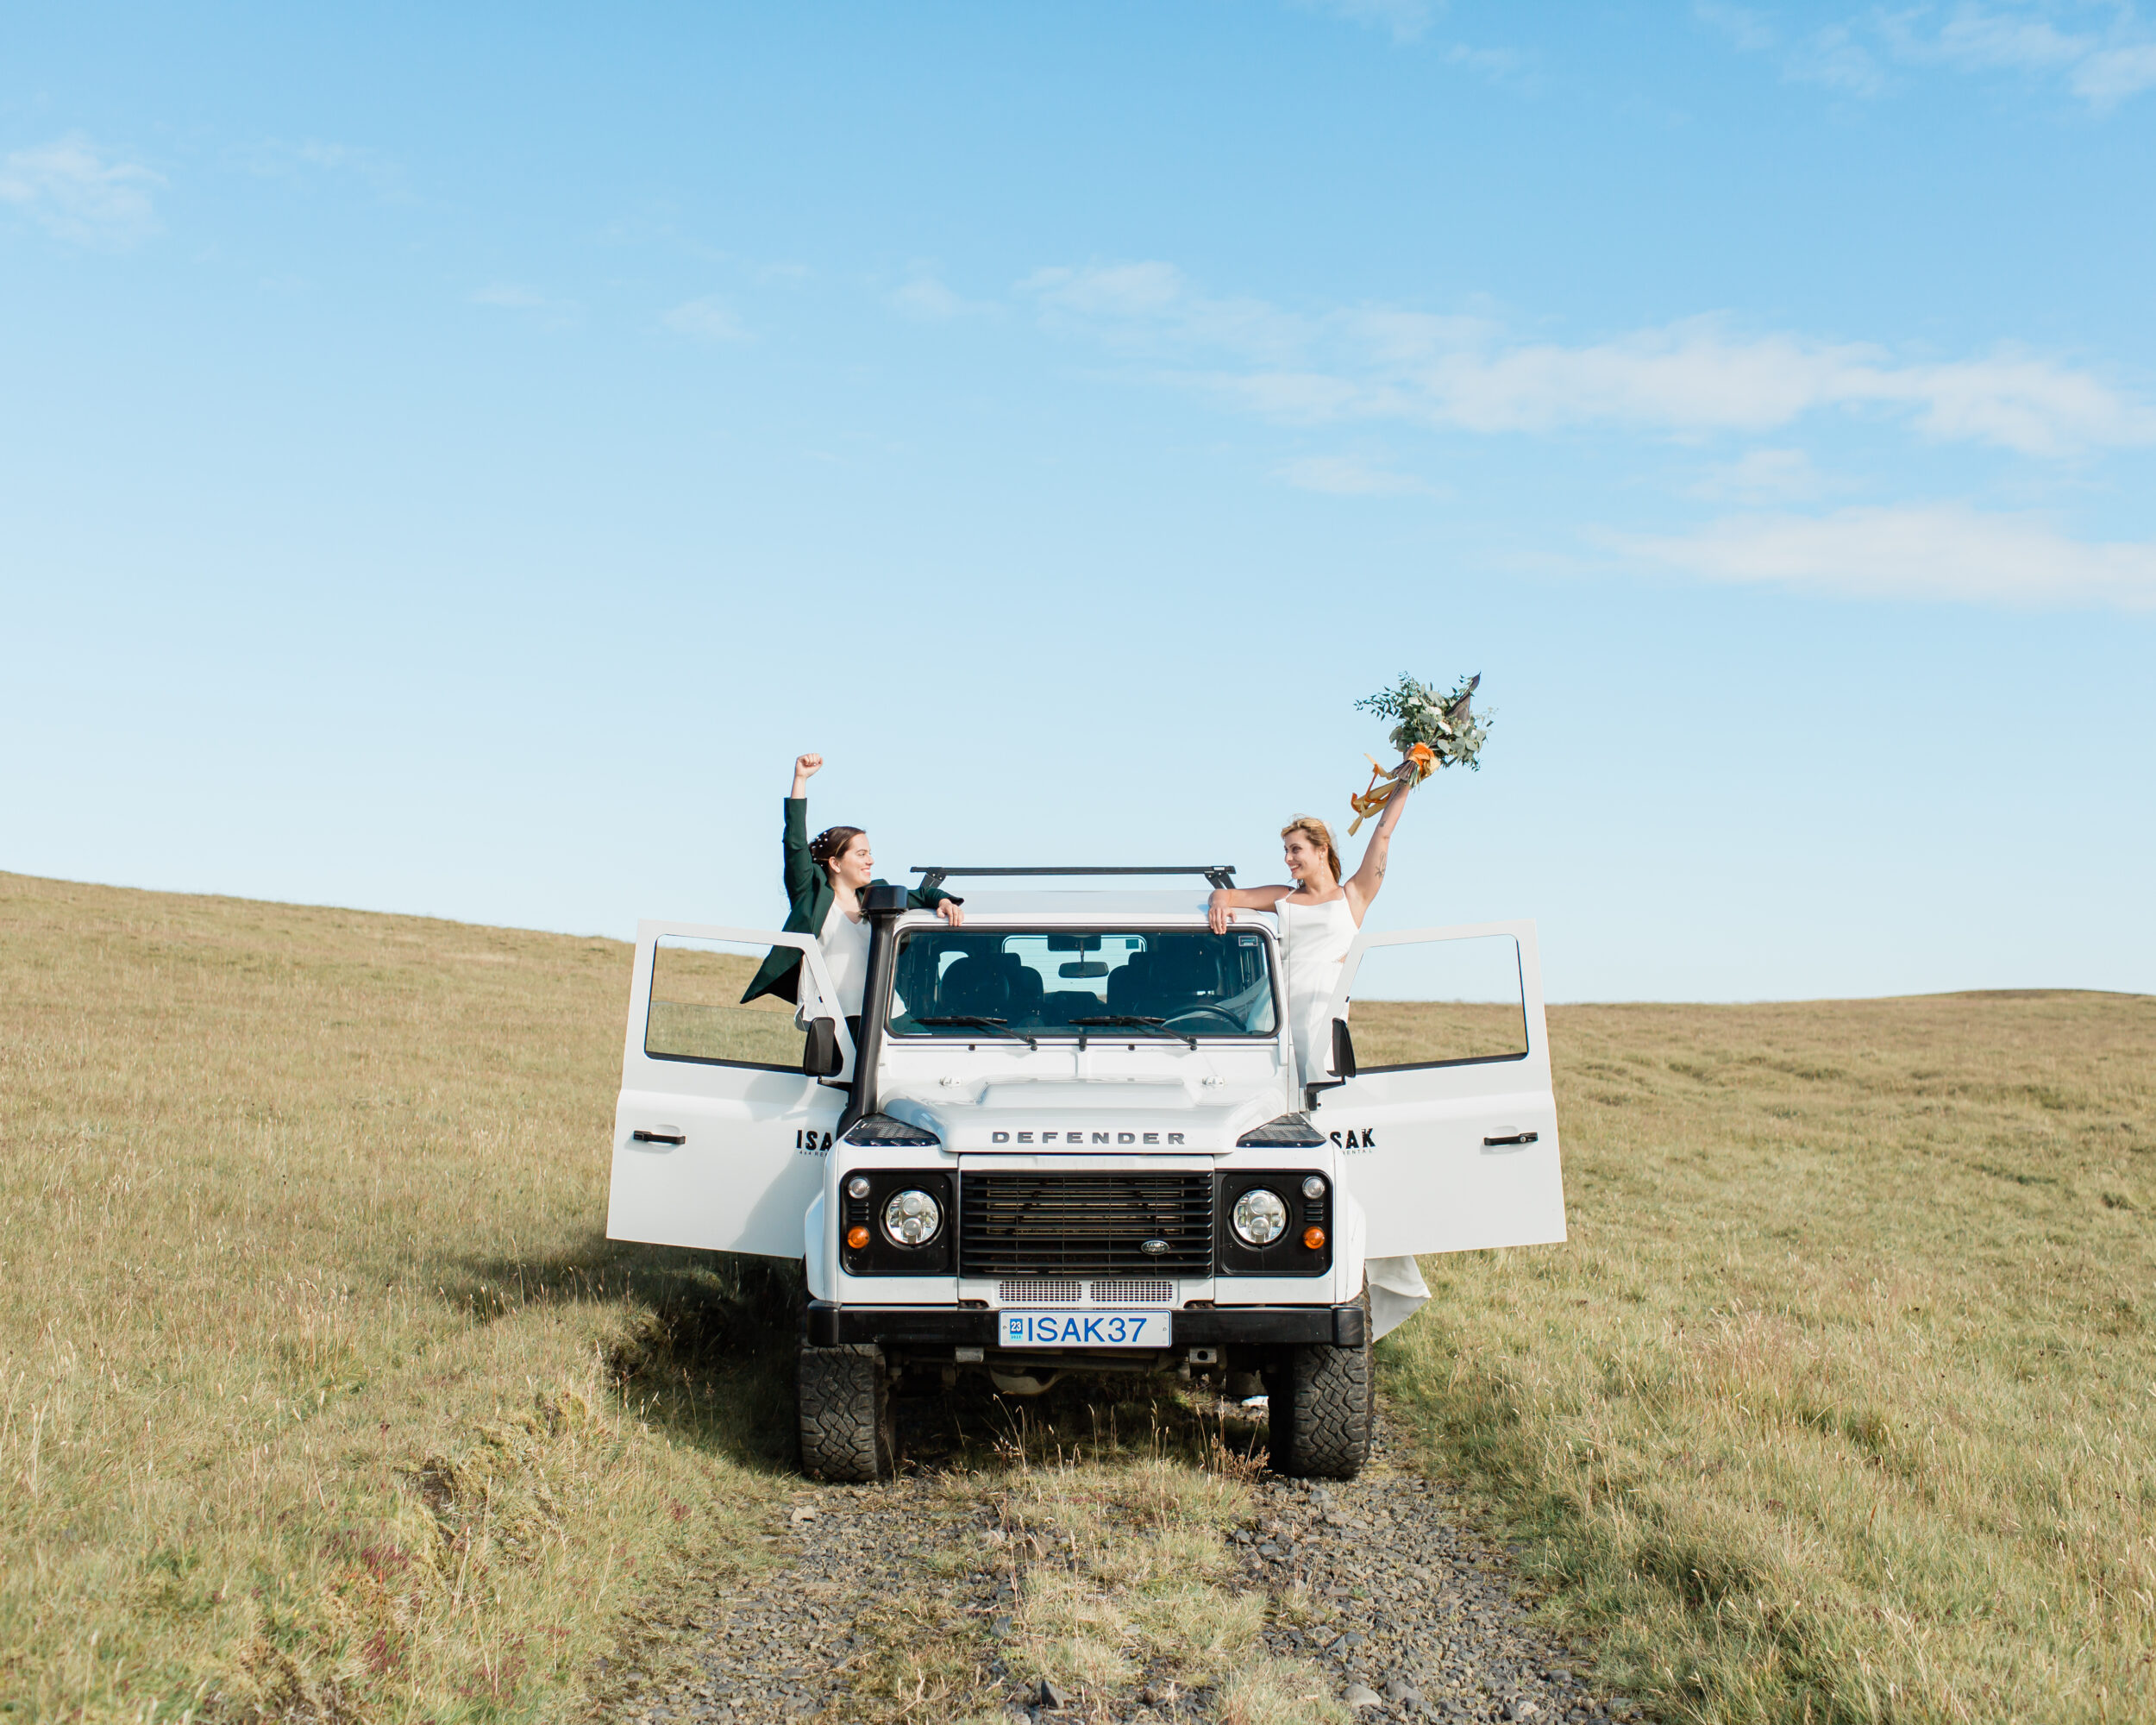 A couple cheers while hanging outside their white Land Rover getaway car.